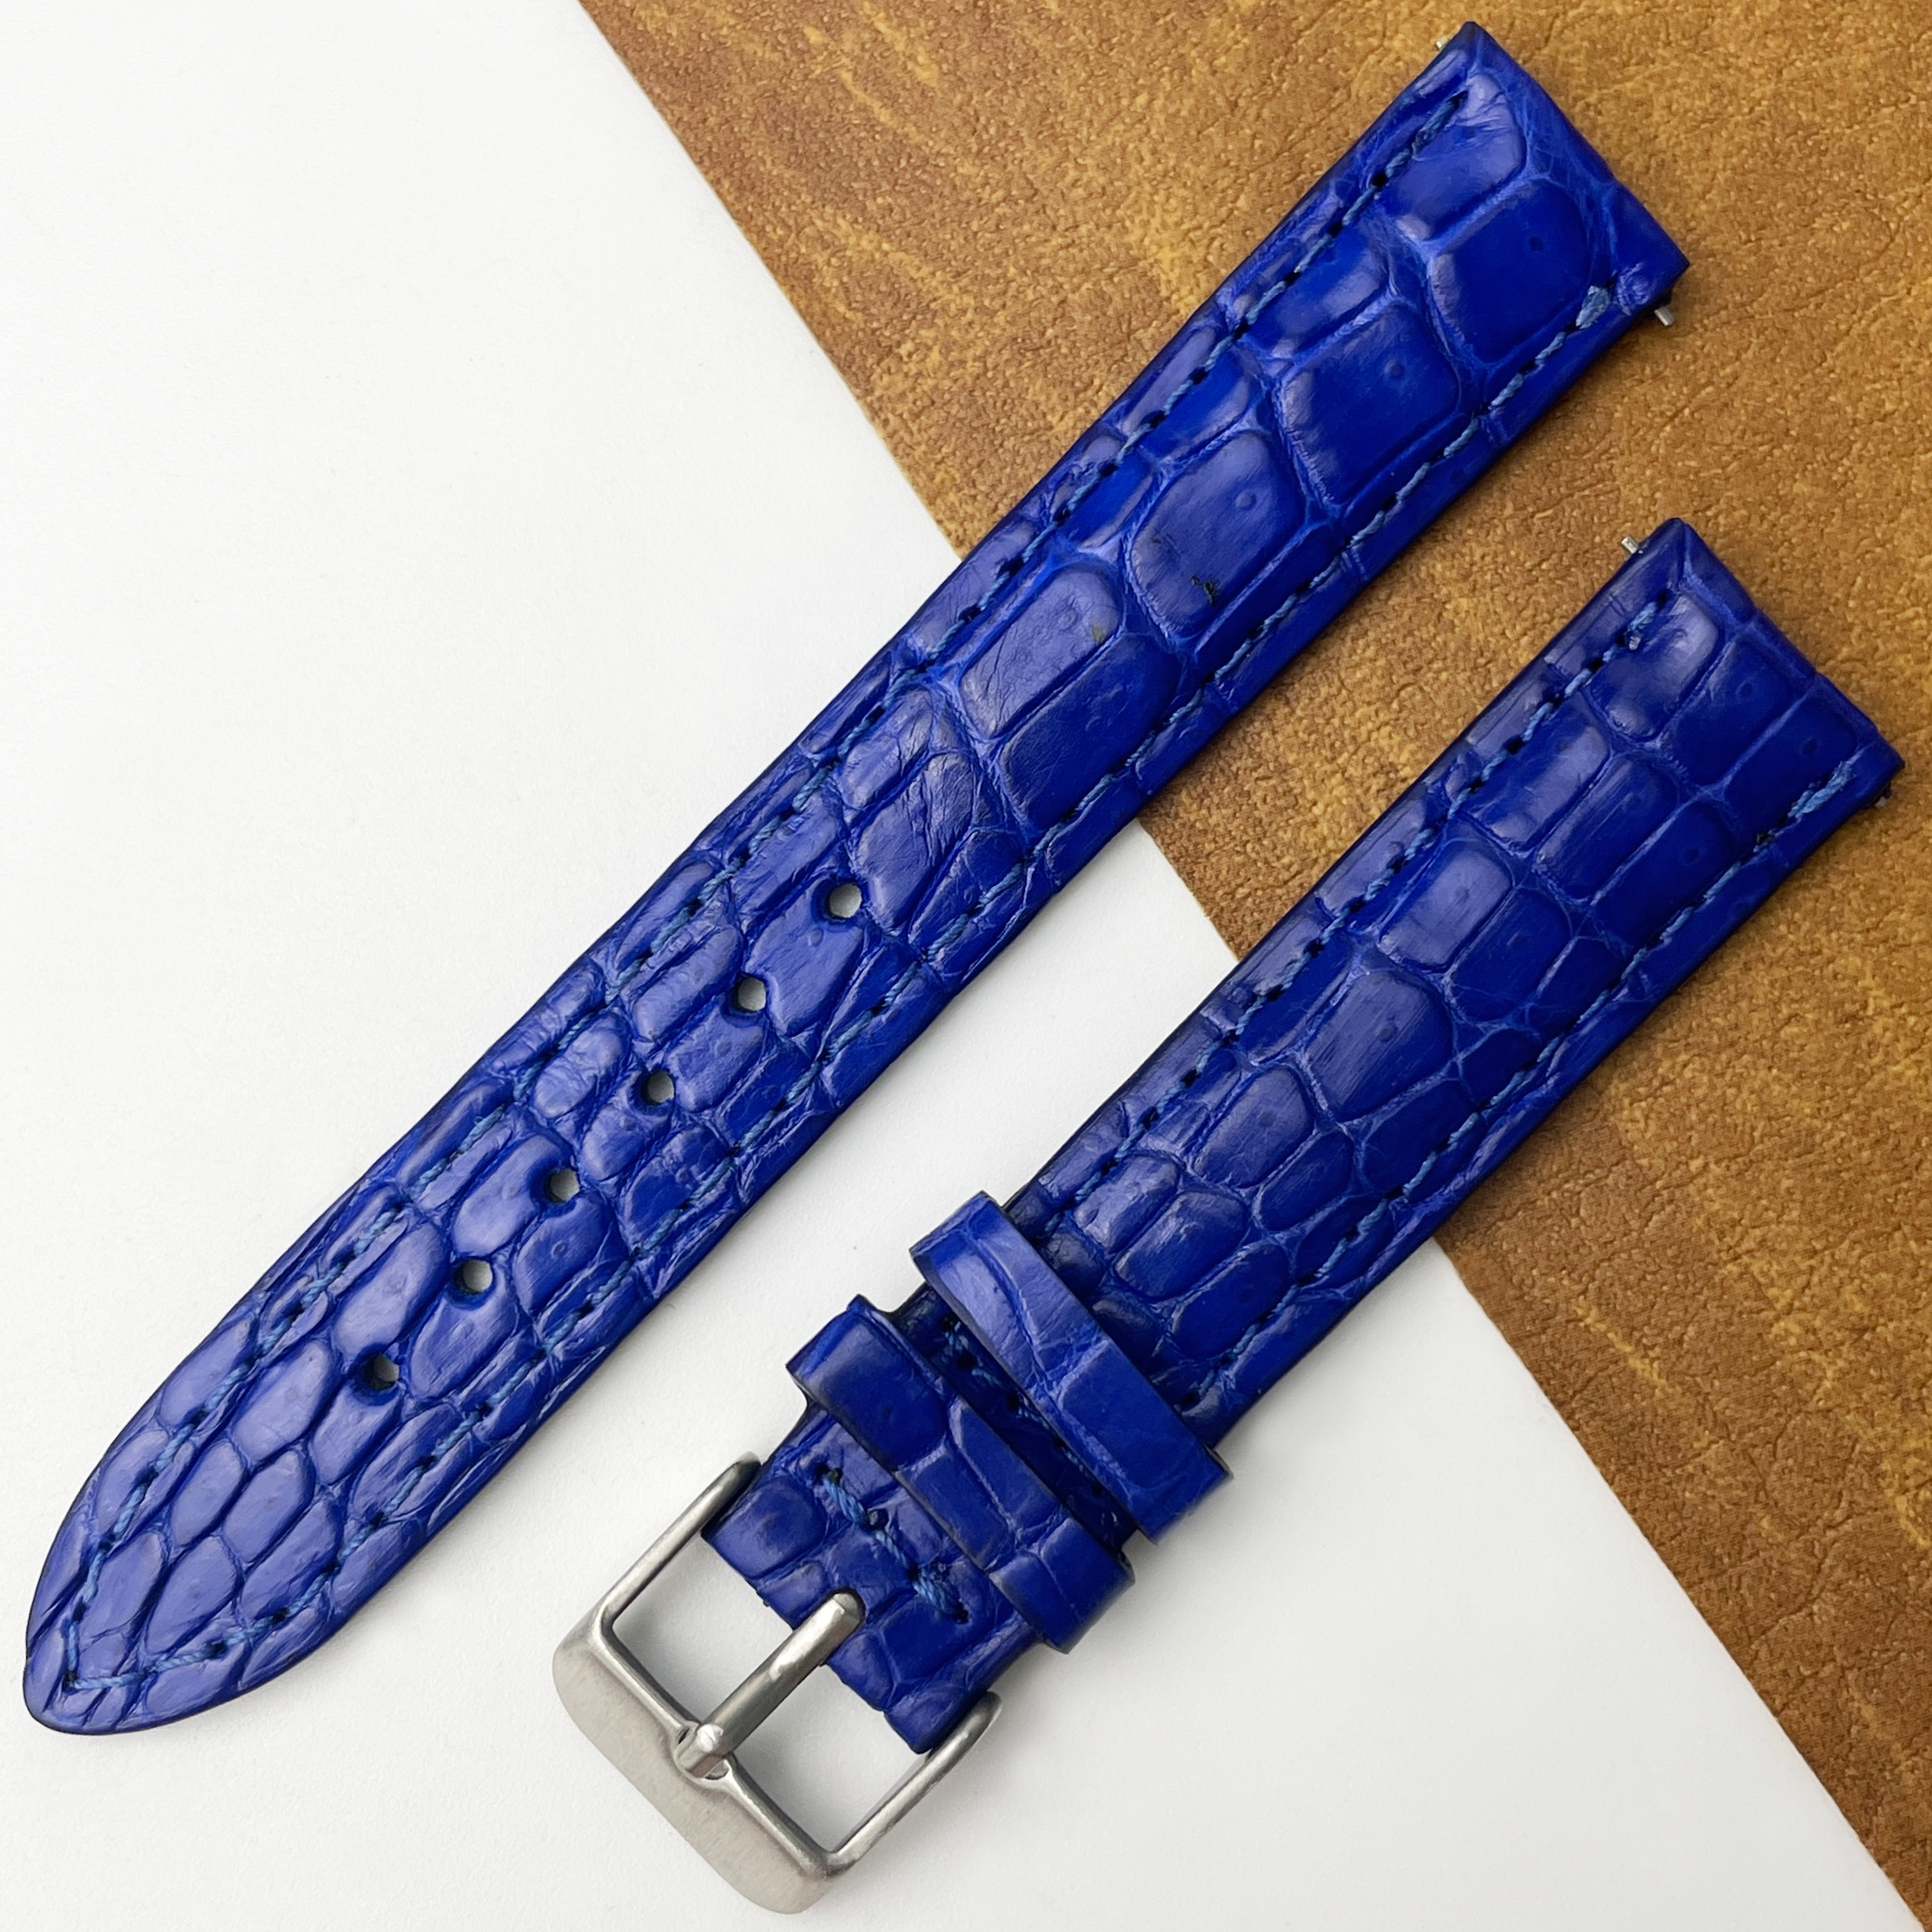 18mm Blue Unique Pattern Alligator Leather Watch Band For Men DH-50AE